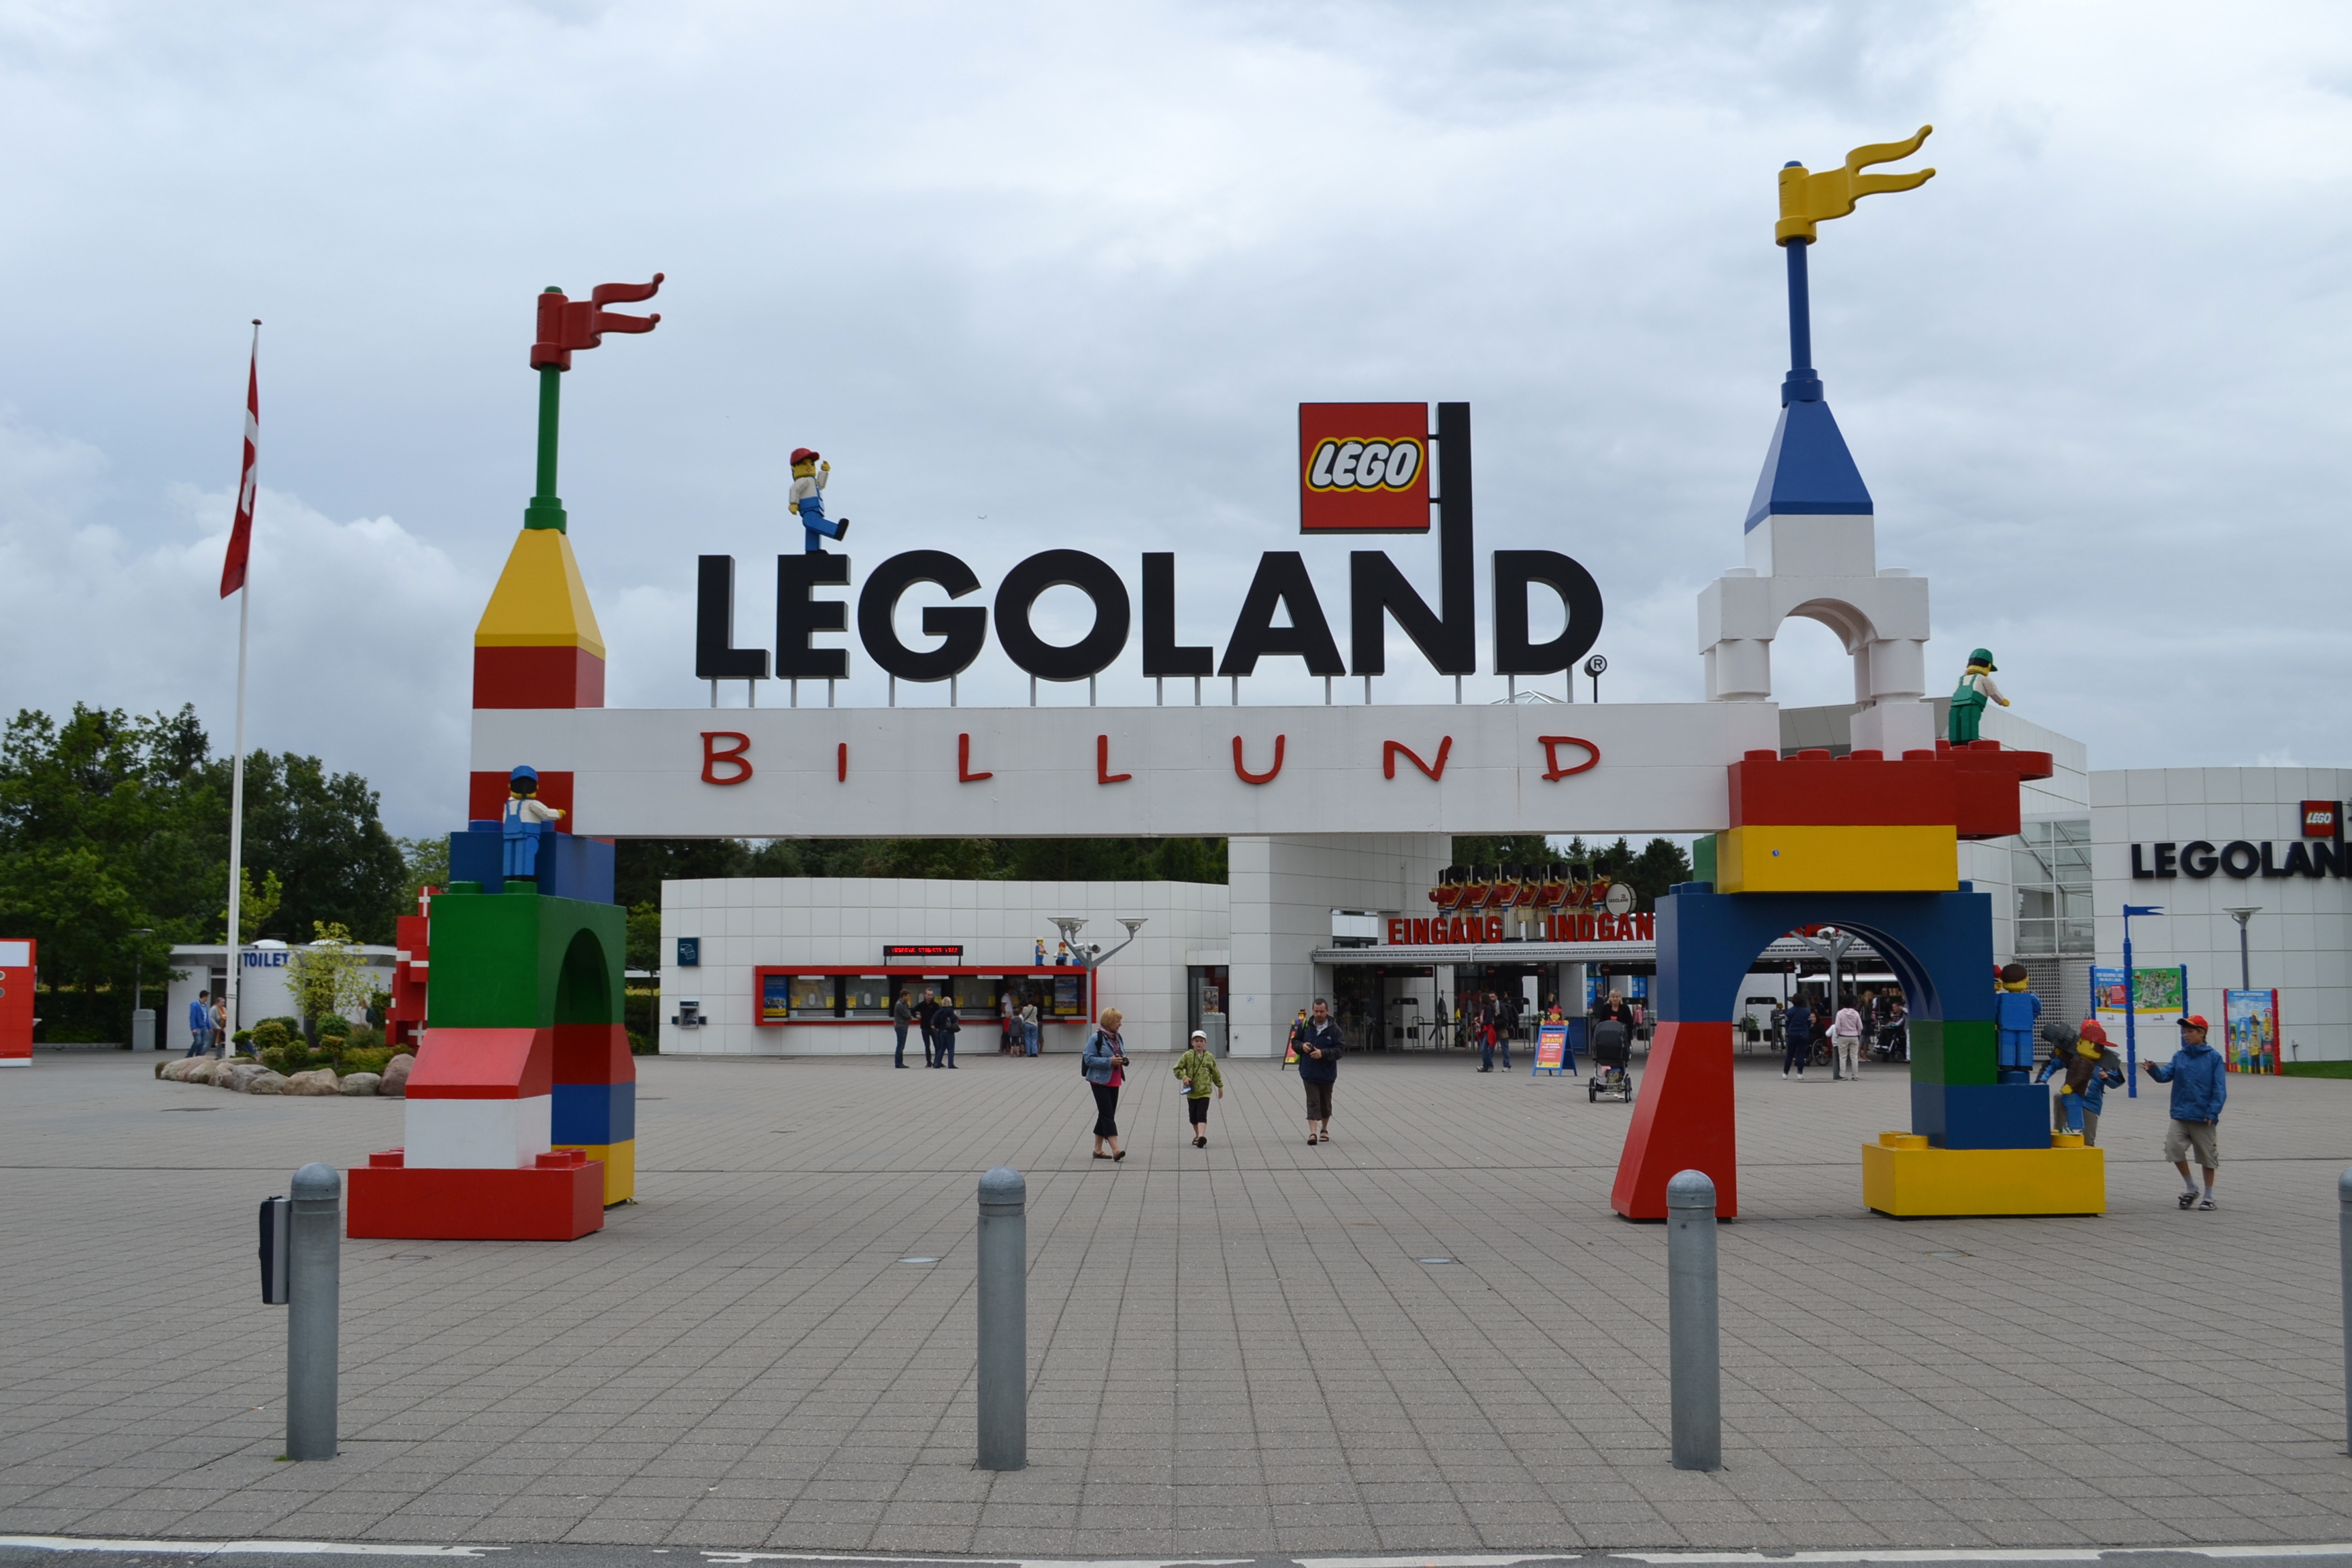 Legoland image from here.